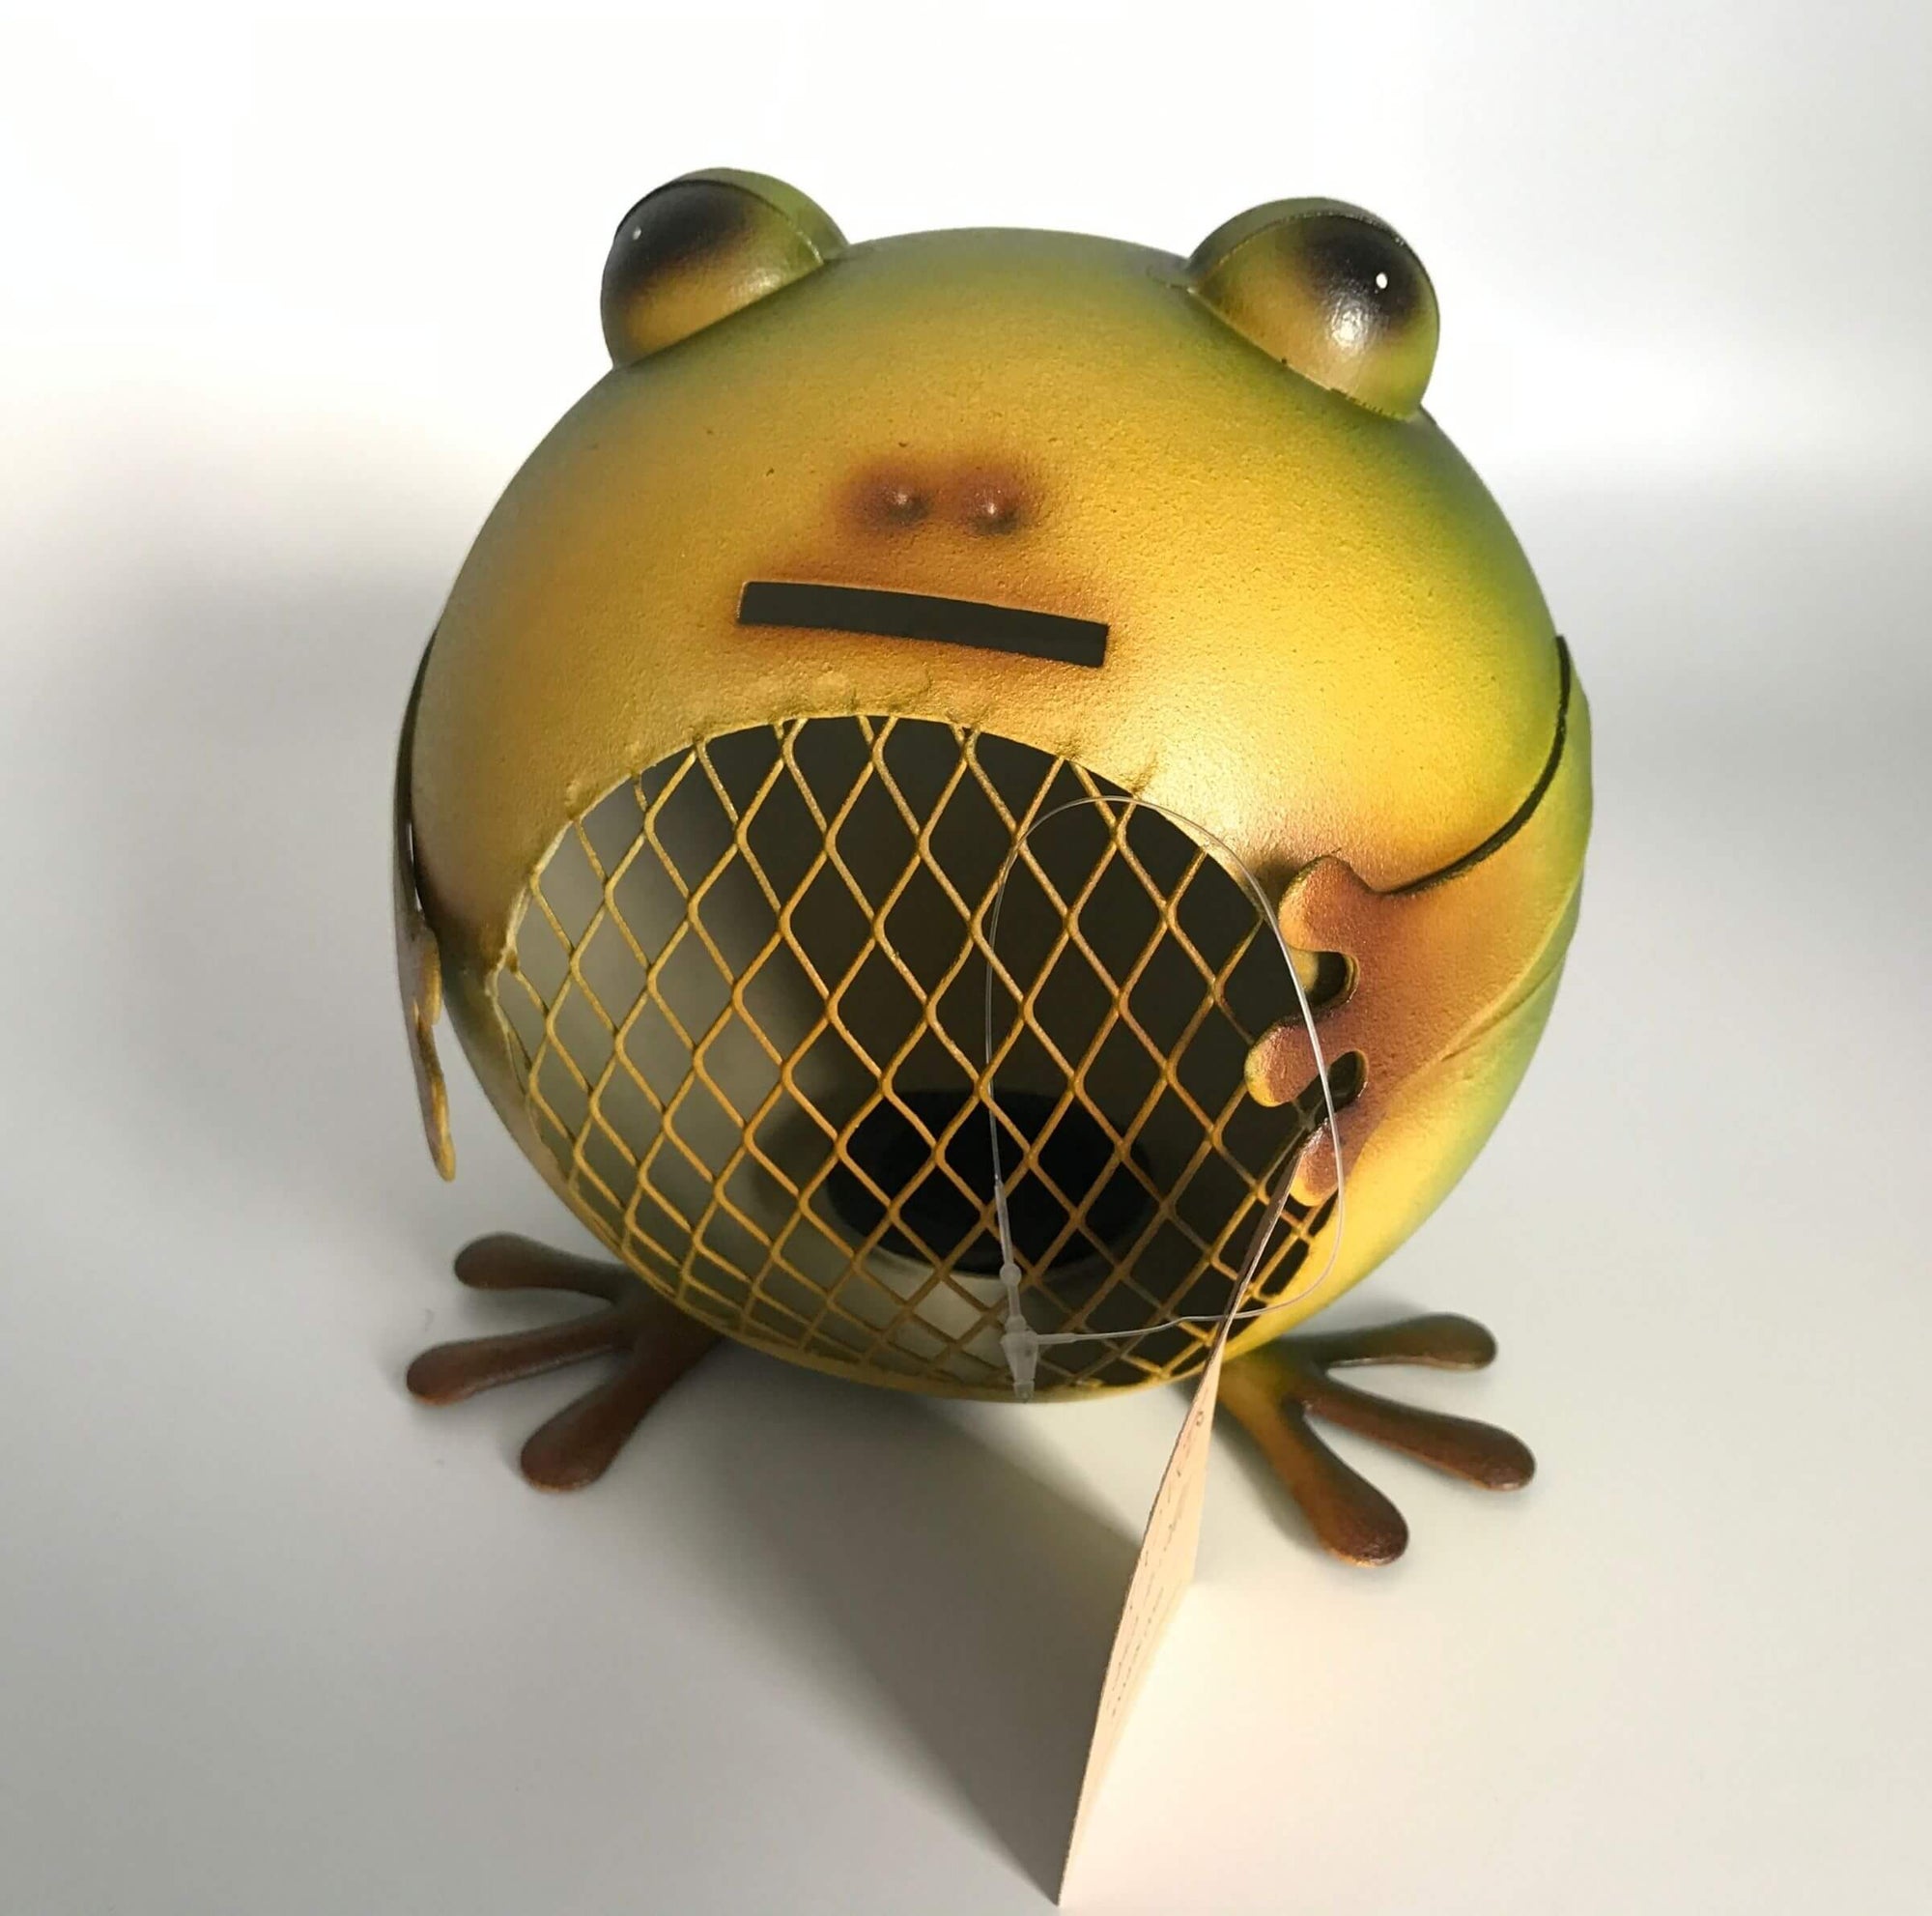 Our delightful little frog piggy bank is just too cute to pass up!